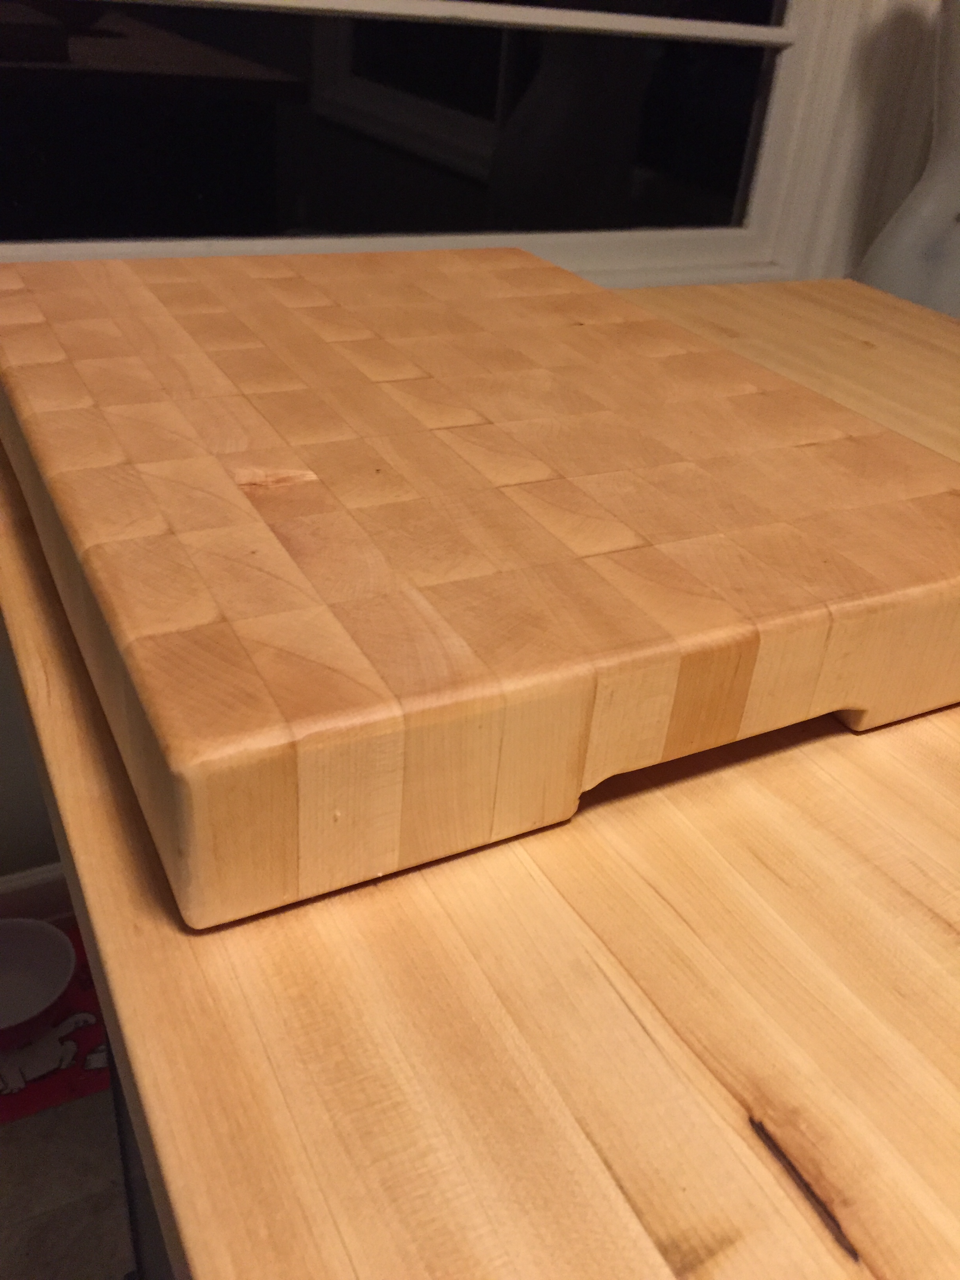 Cutting Board Build - Finished